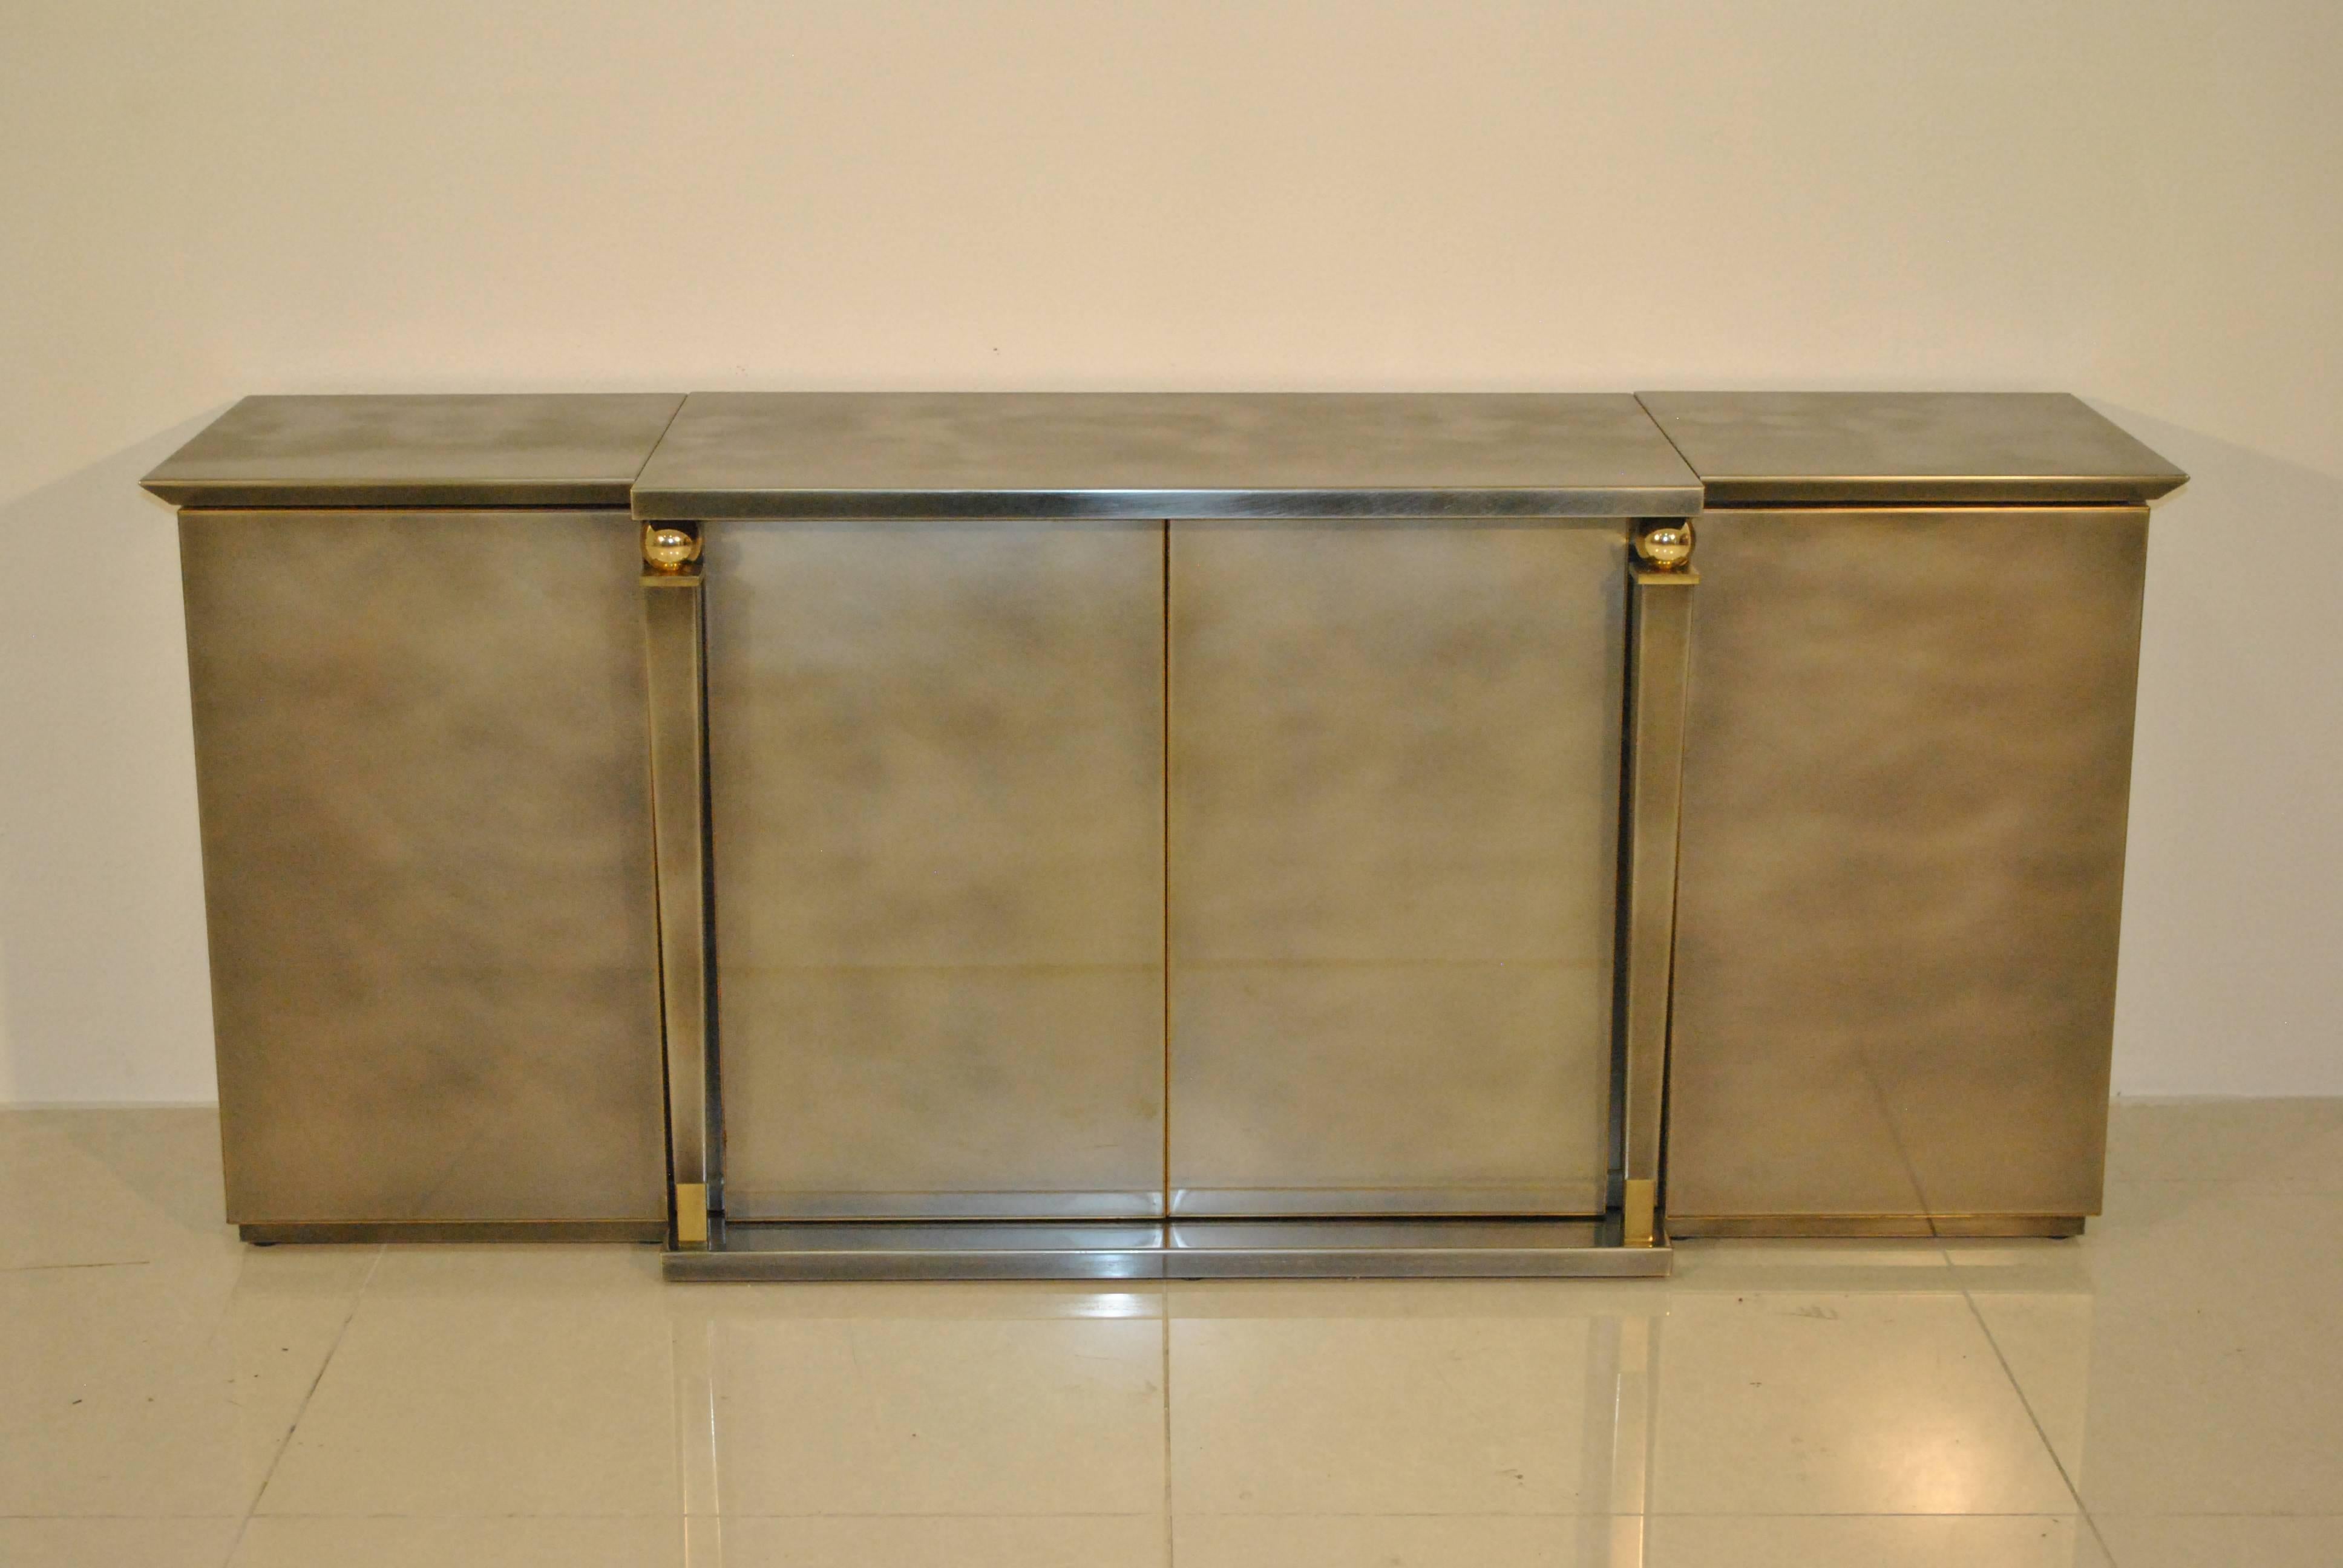 Belgian Brushed Steel and Gold Sideboard by Belgo Chrome, 1980s For Sale